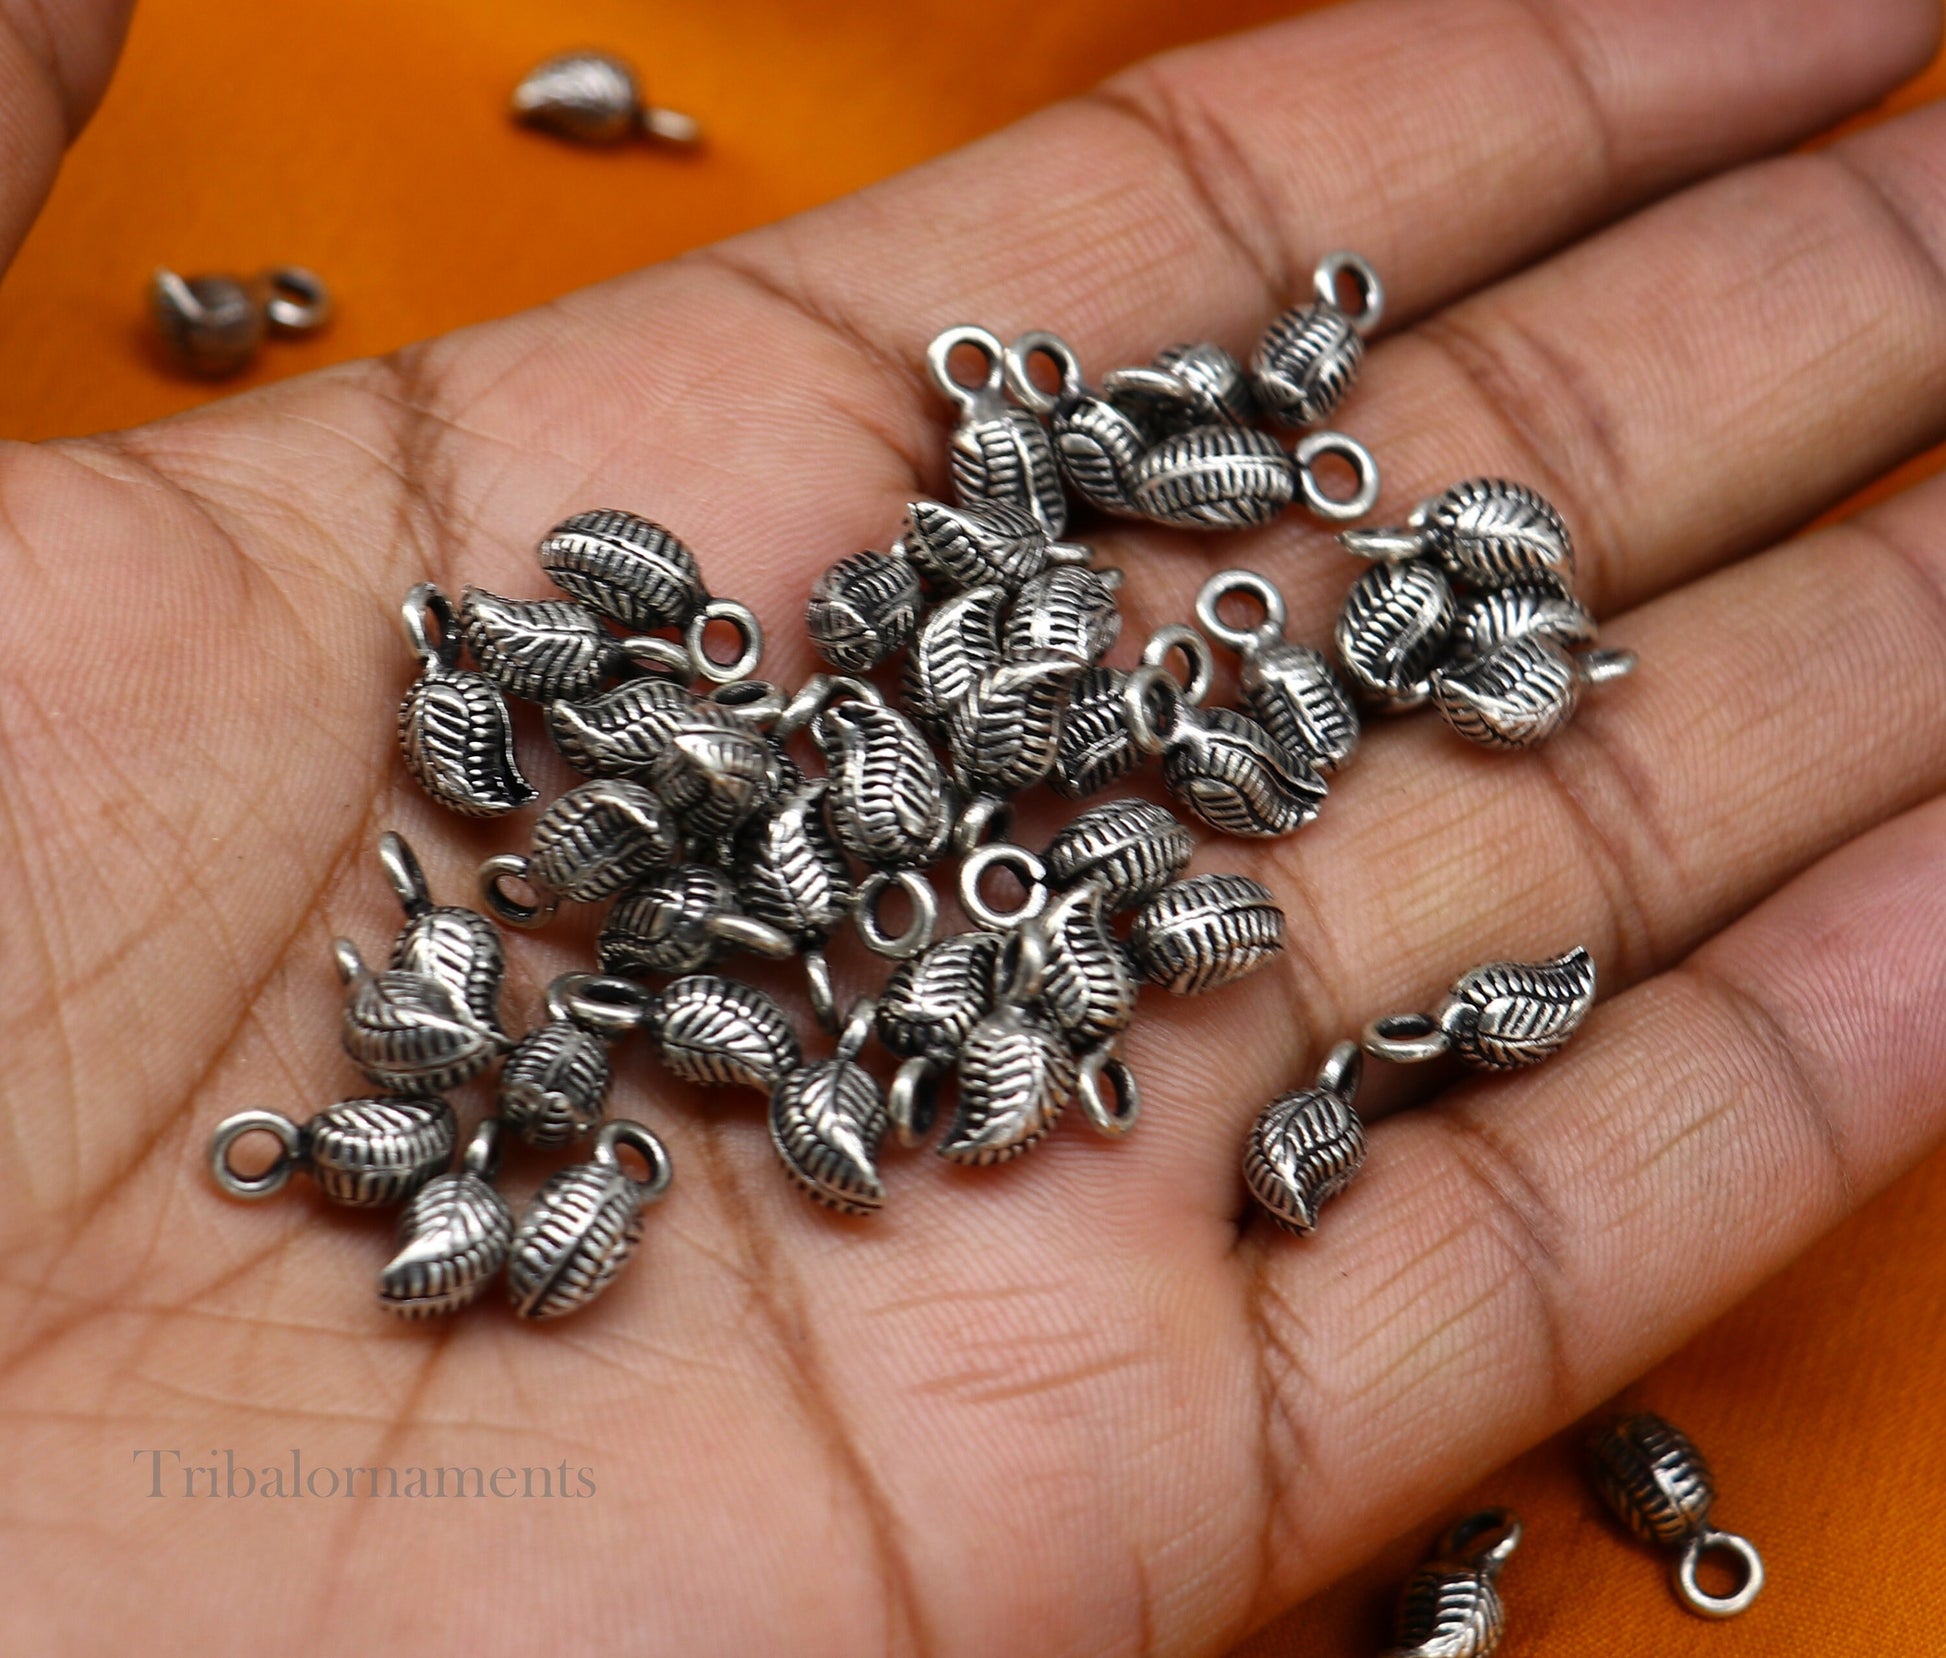 Lot 20 pieces jingling bells vintage mango design 925 sterling silver beads or hanging drops for custom jewelry making lose beads bd14 - TRIBAL ORNAMENTS